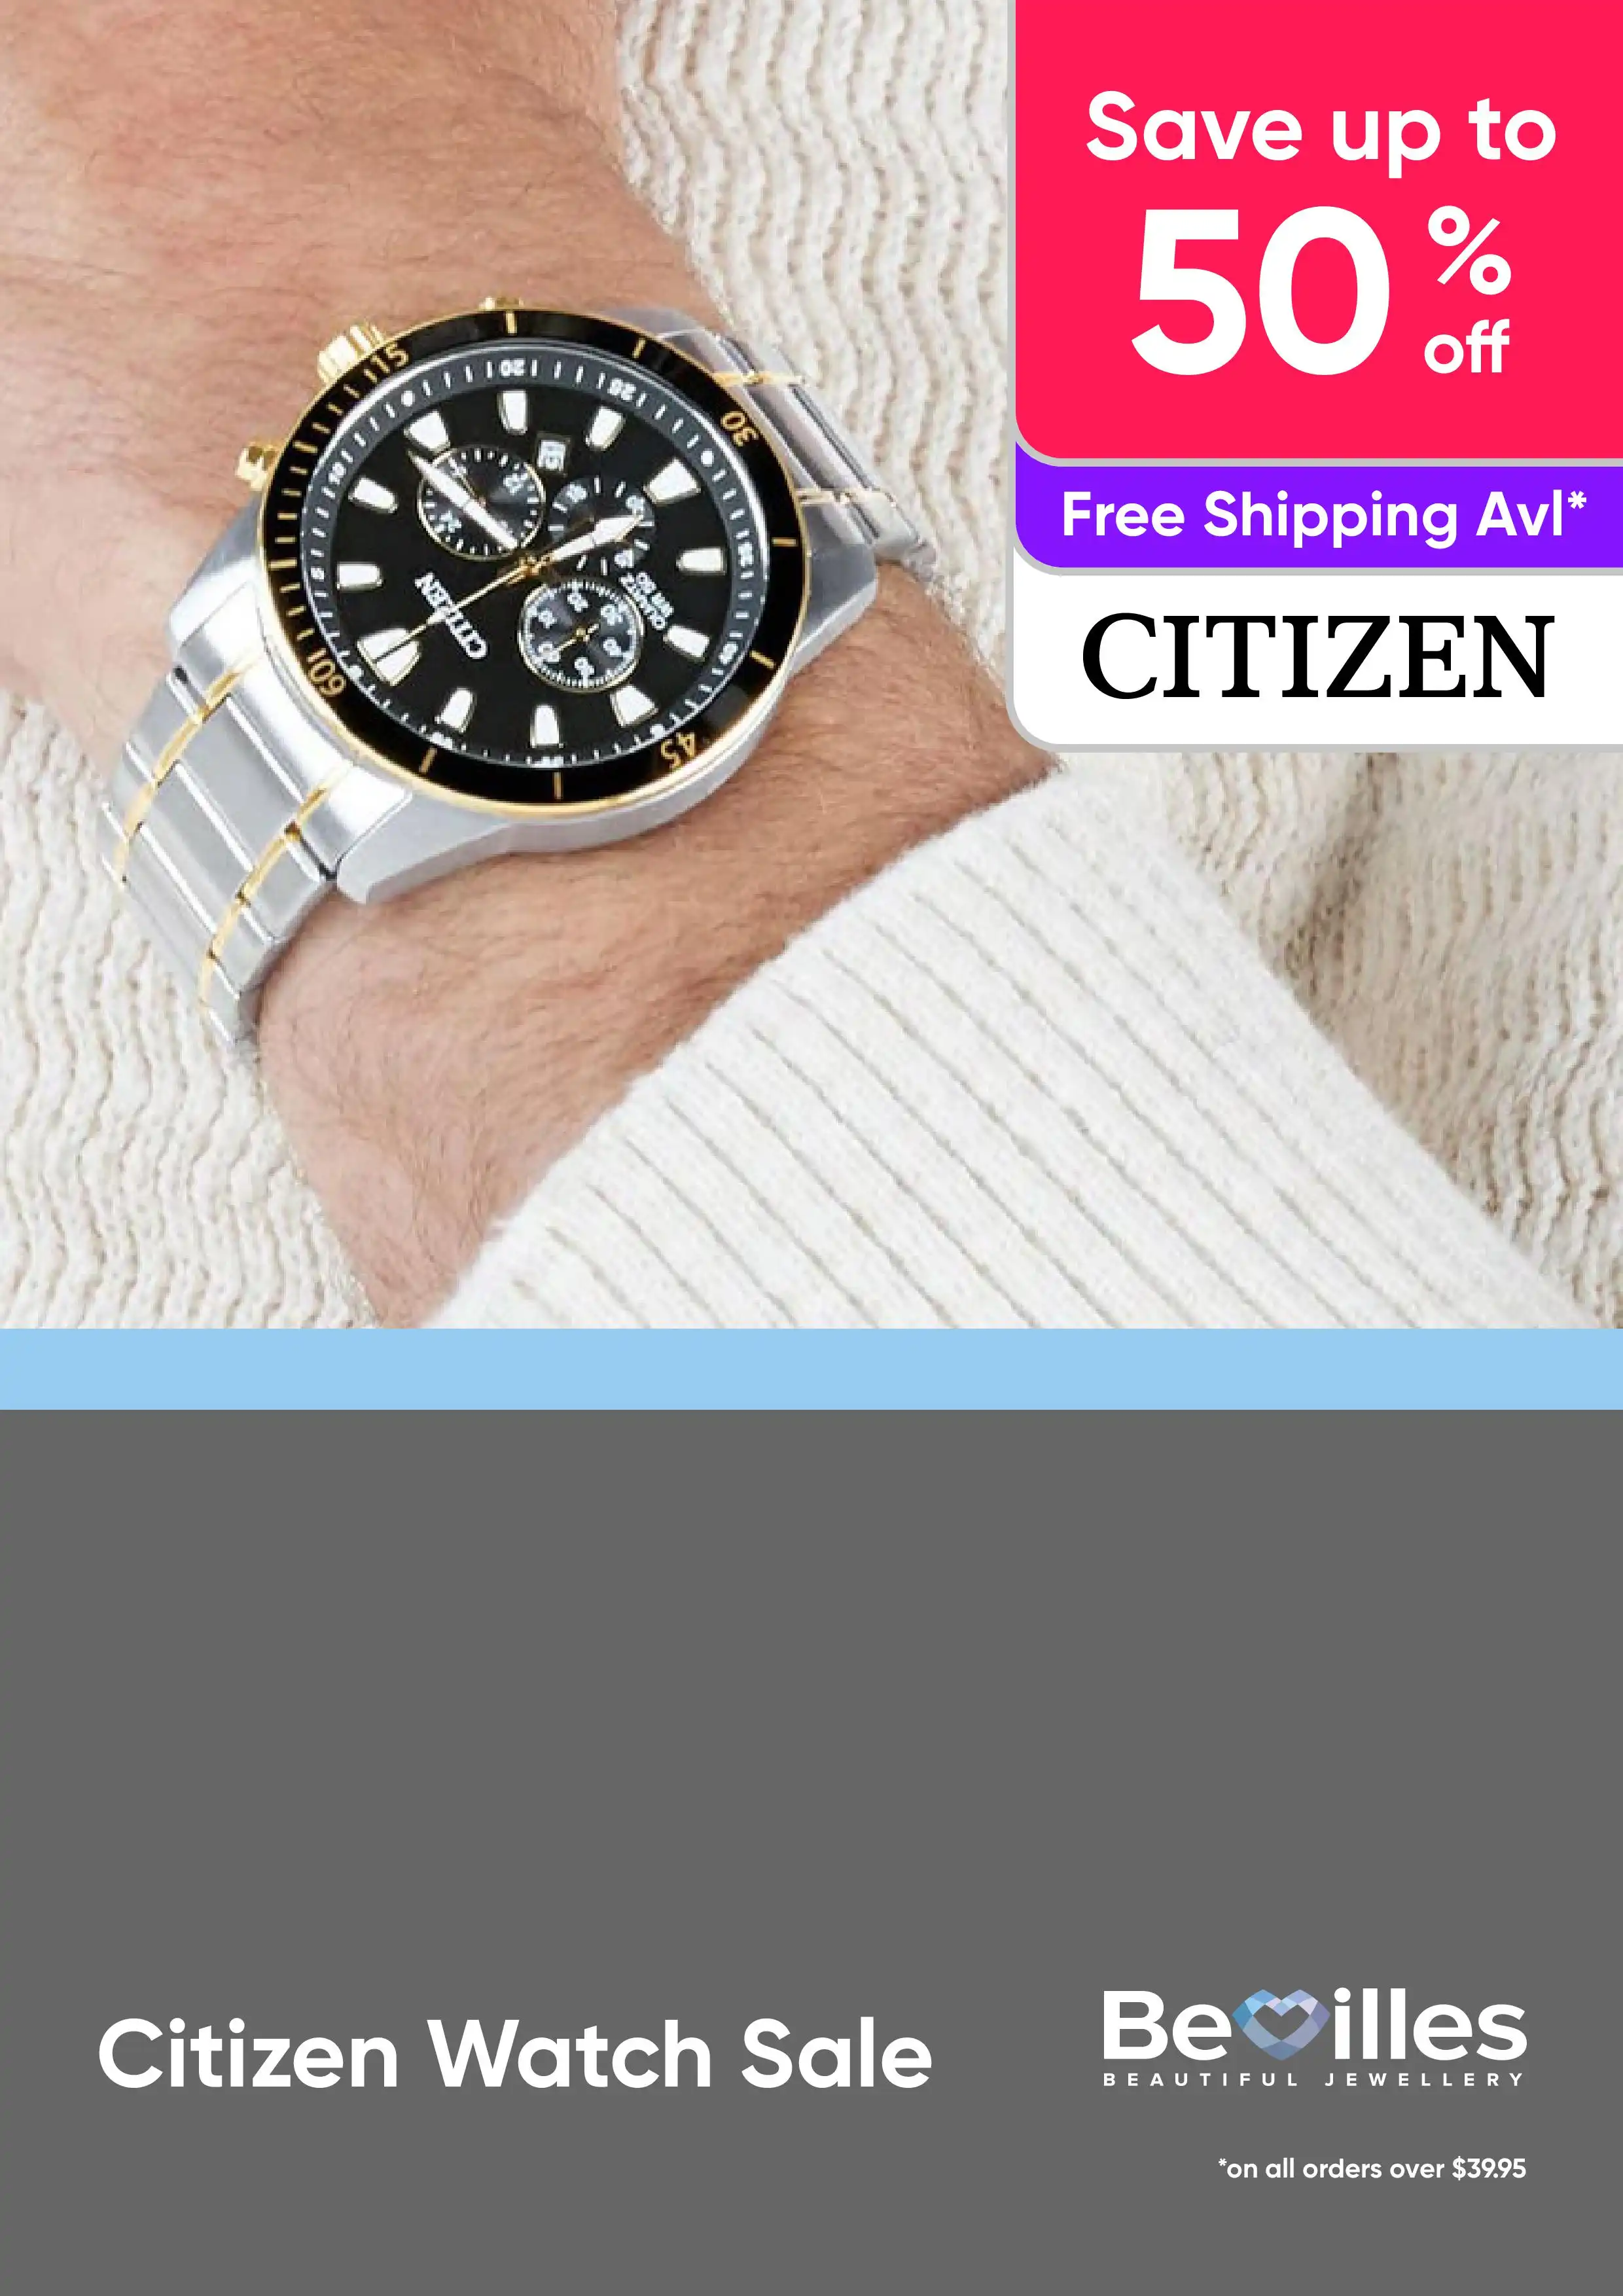 Citizen Watch Sale - up to 50% off